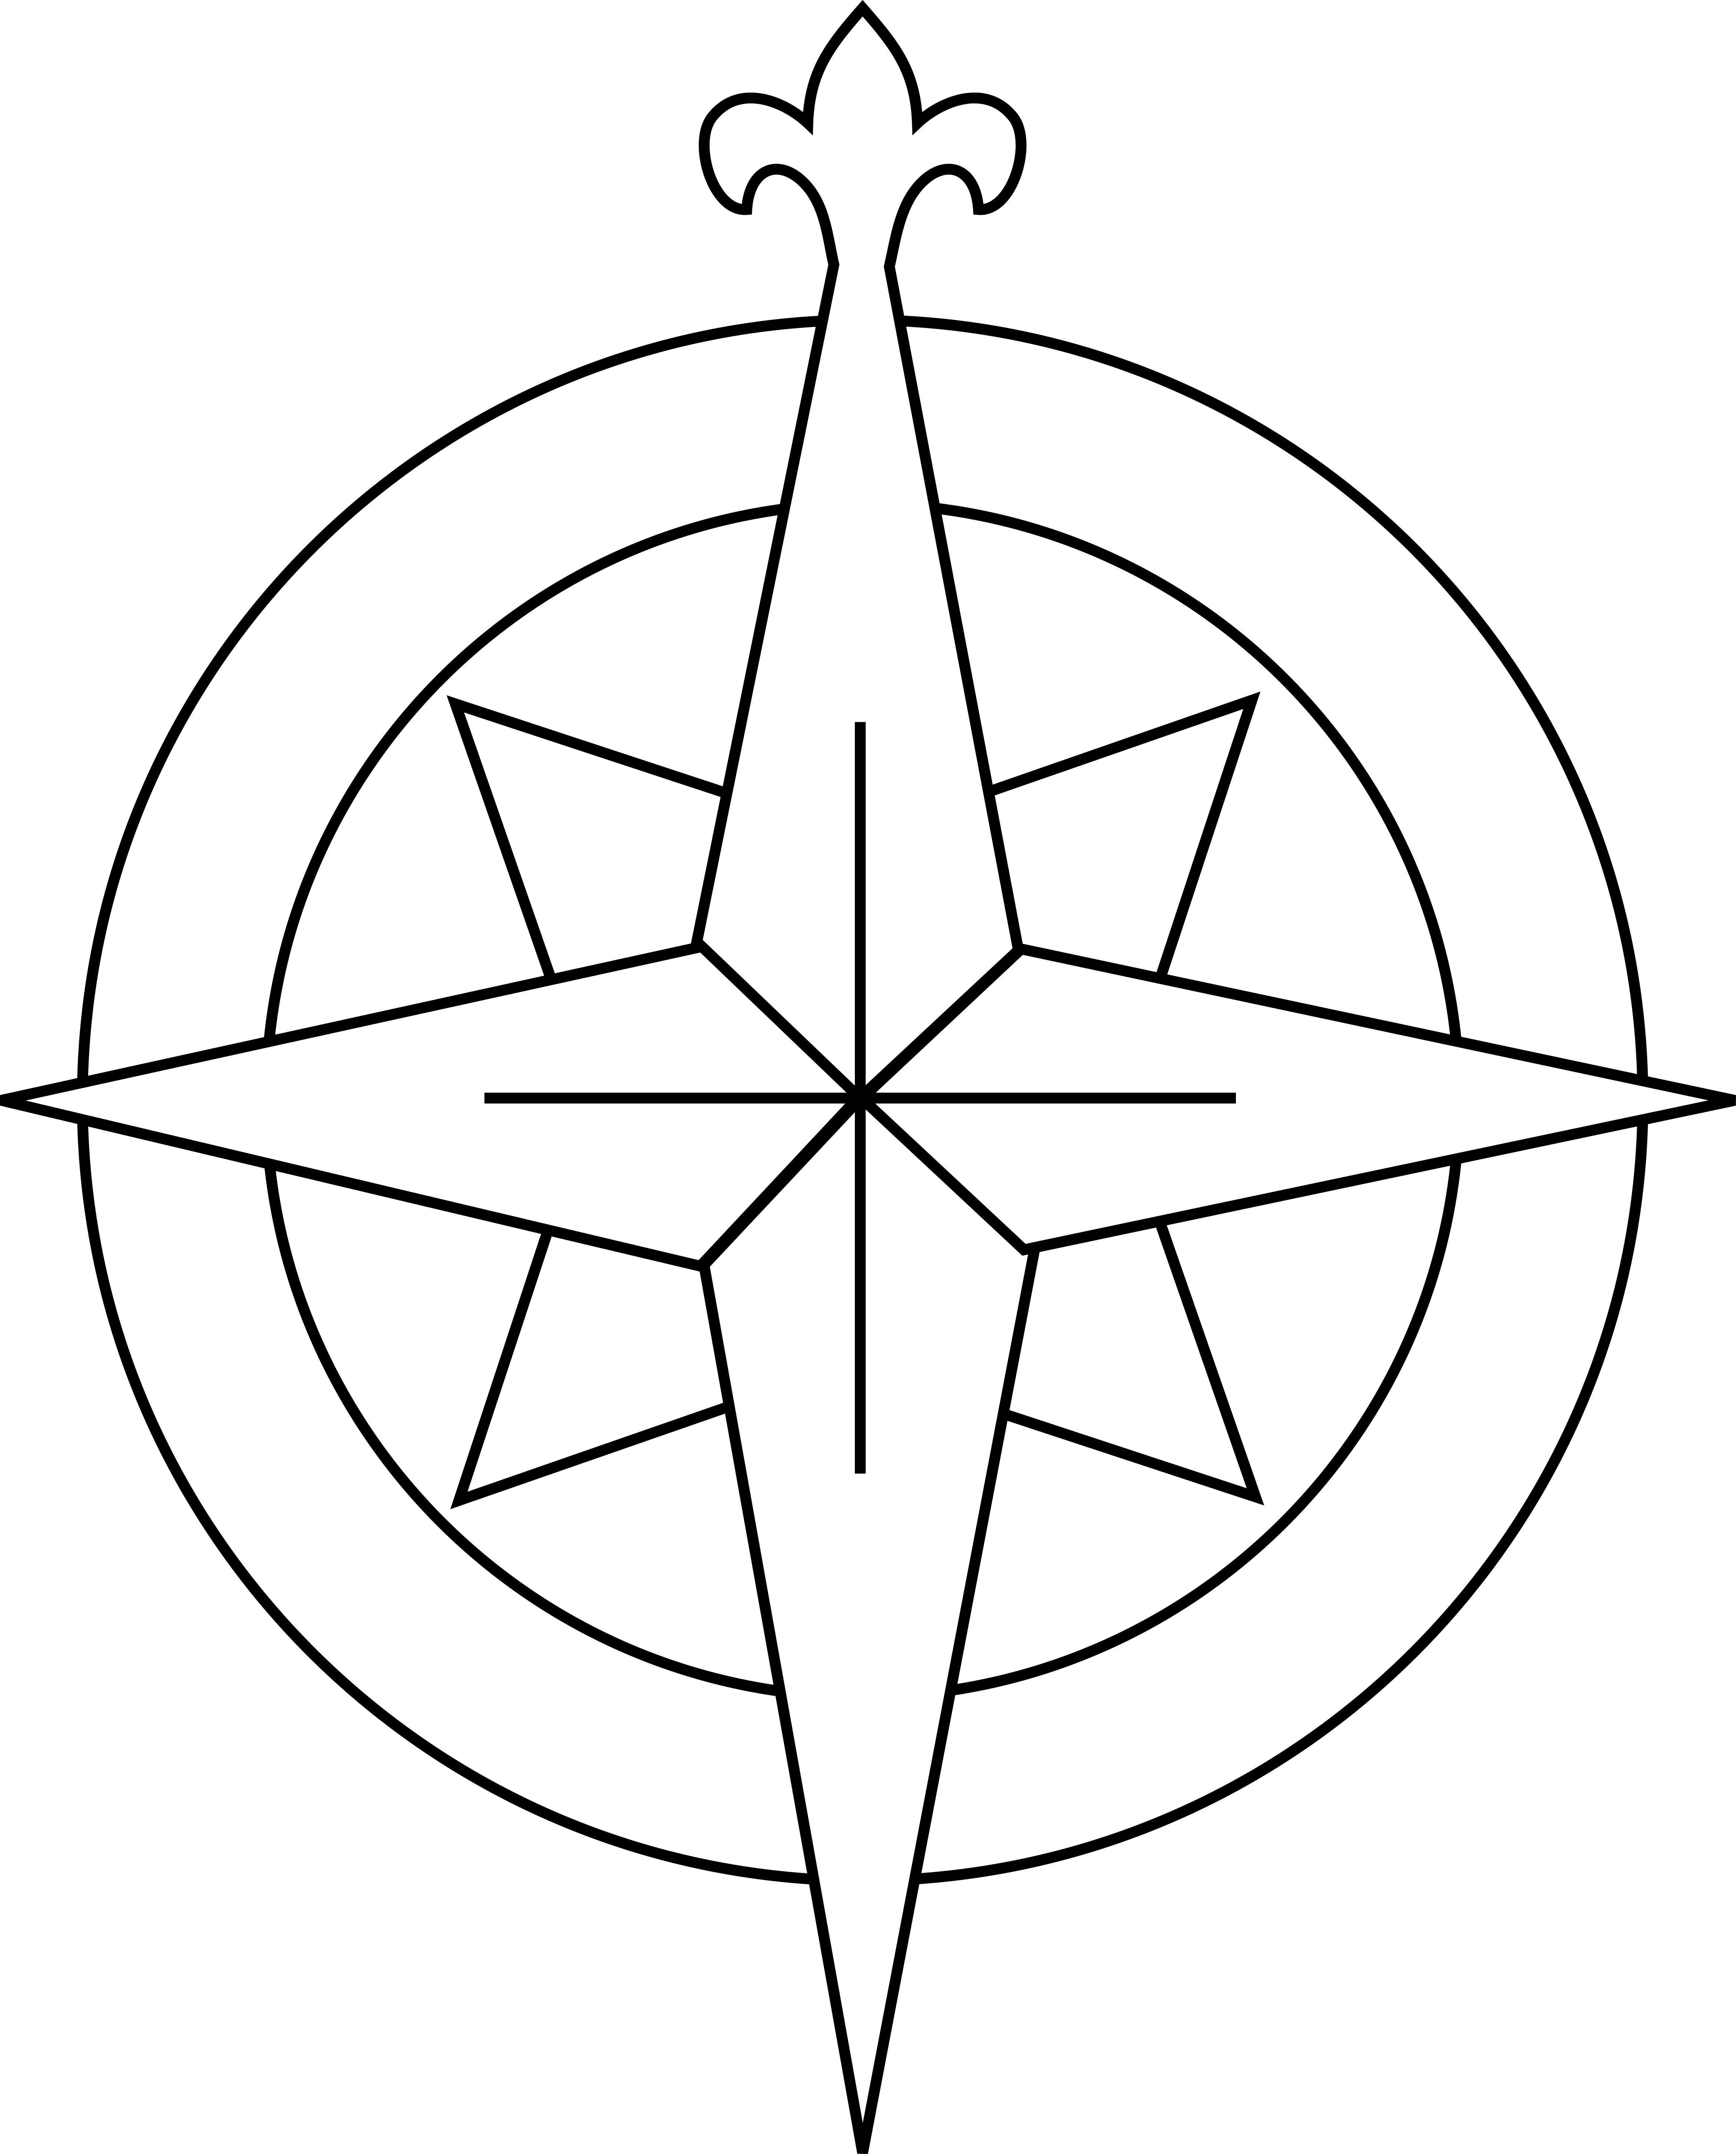 Compass Rose Black And White - Clipart library - Clipart library